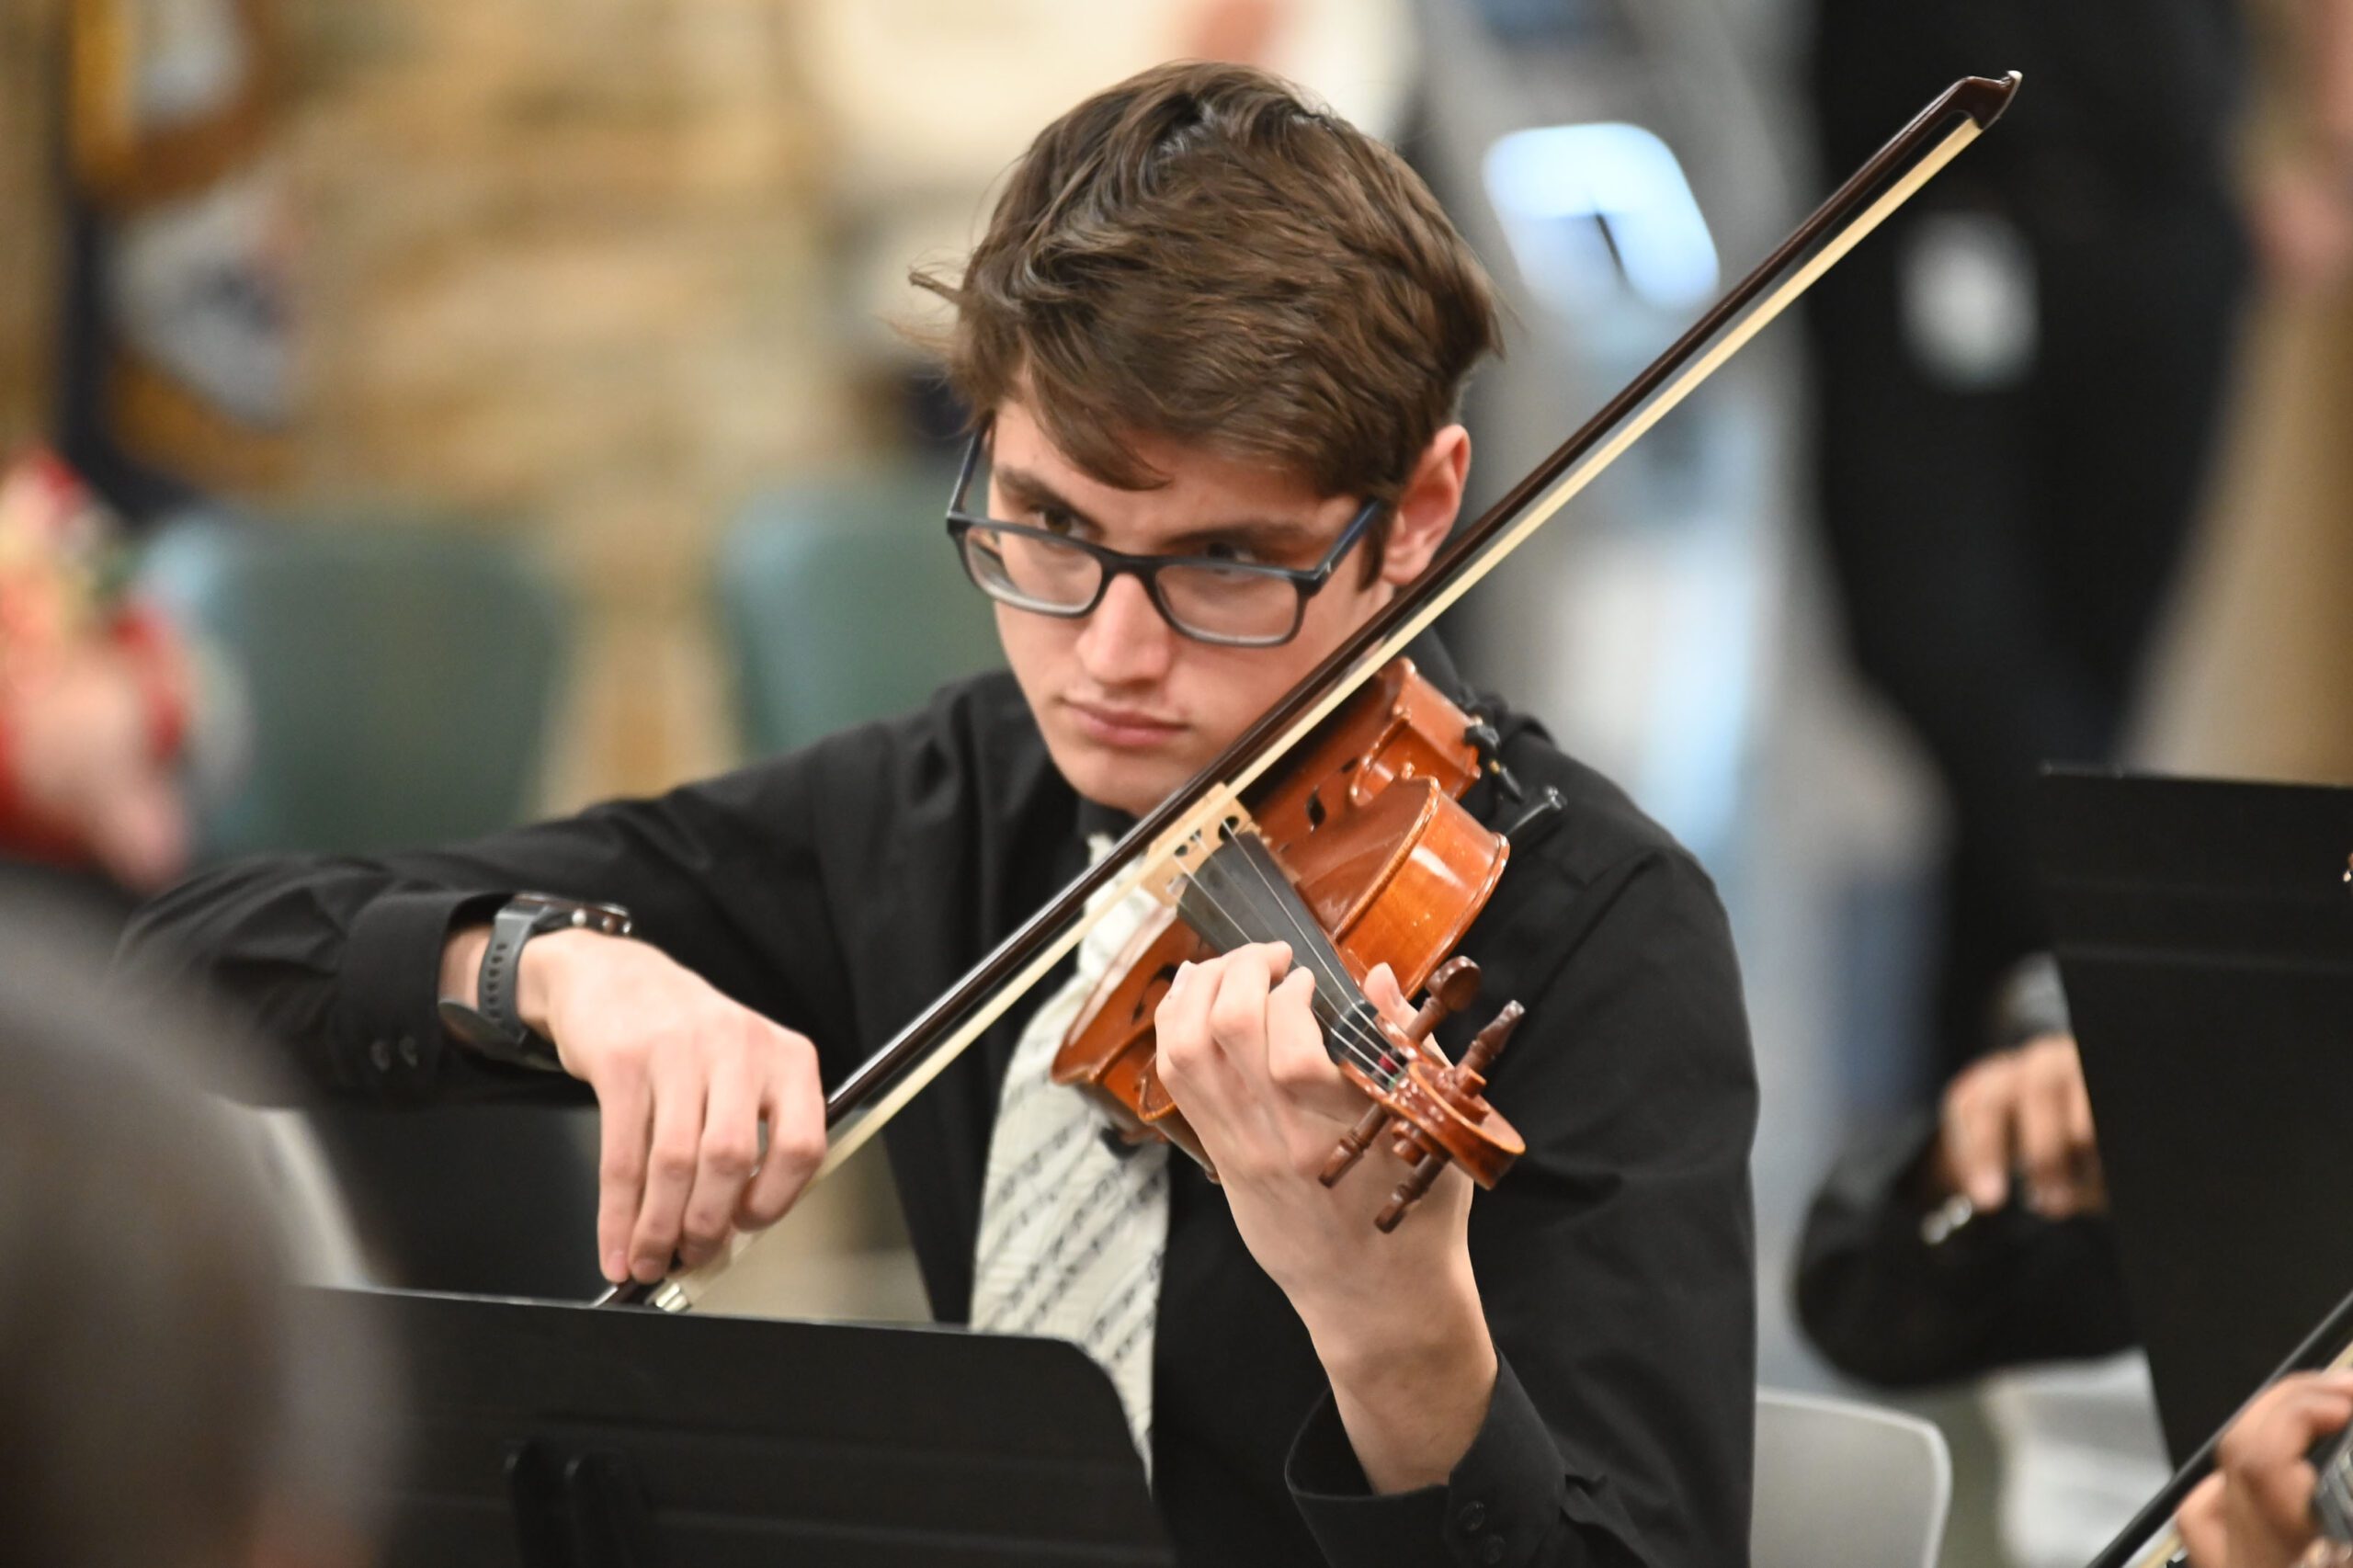 Student playing music at holiday concert